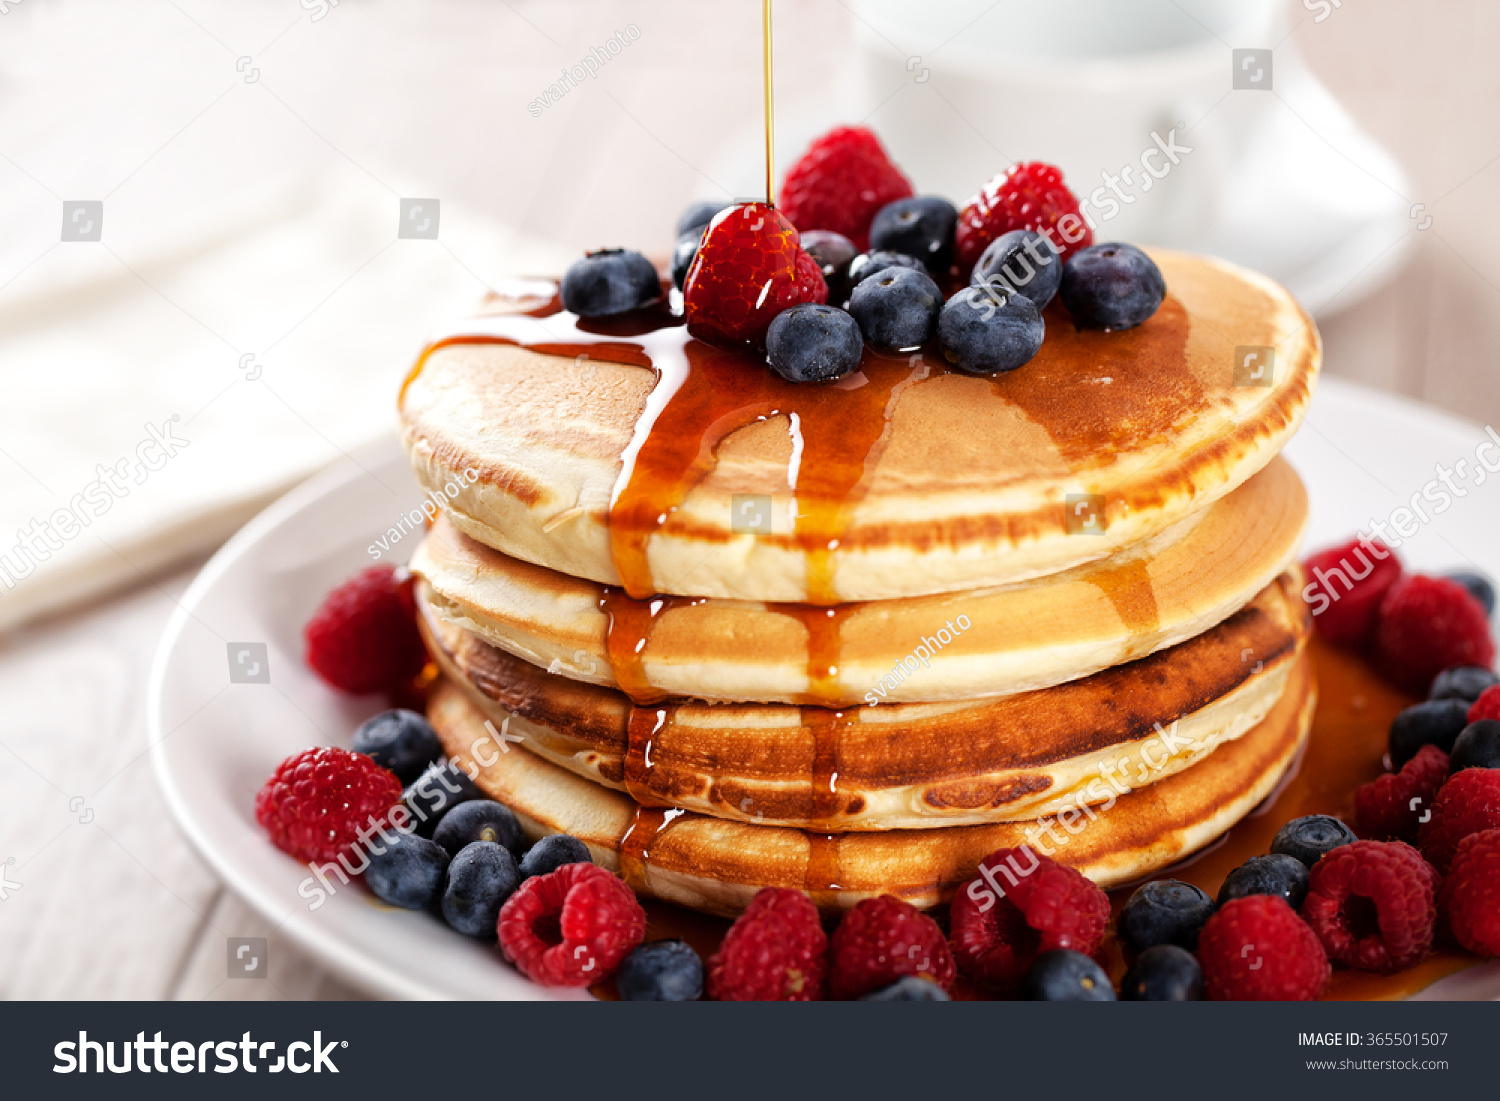 Pancakes with berries and maple syrup #365501507